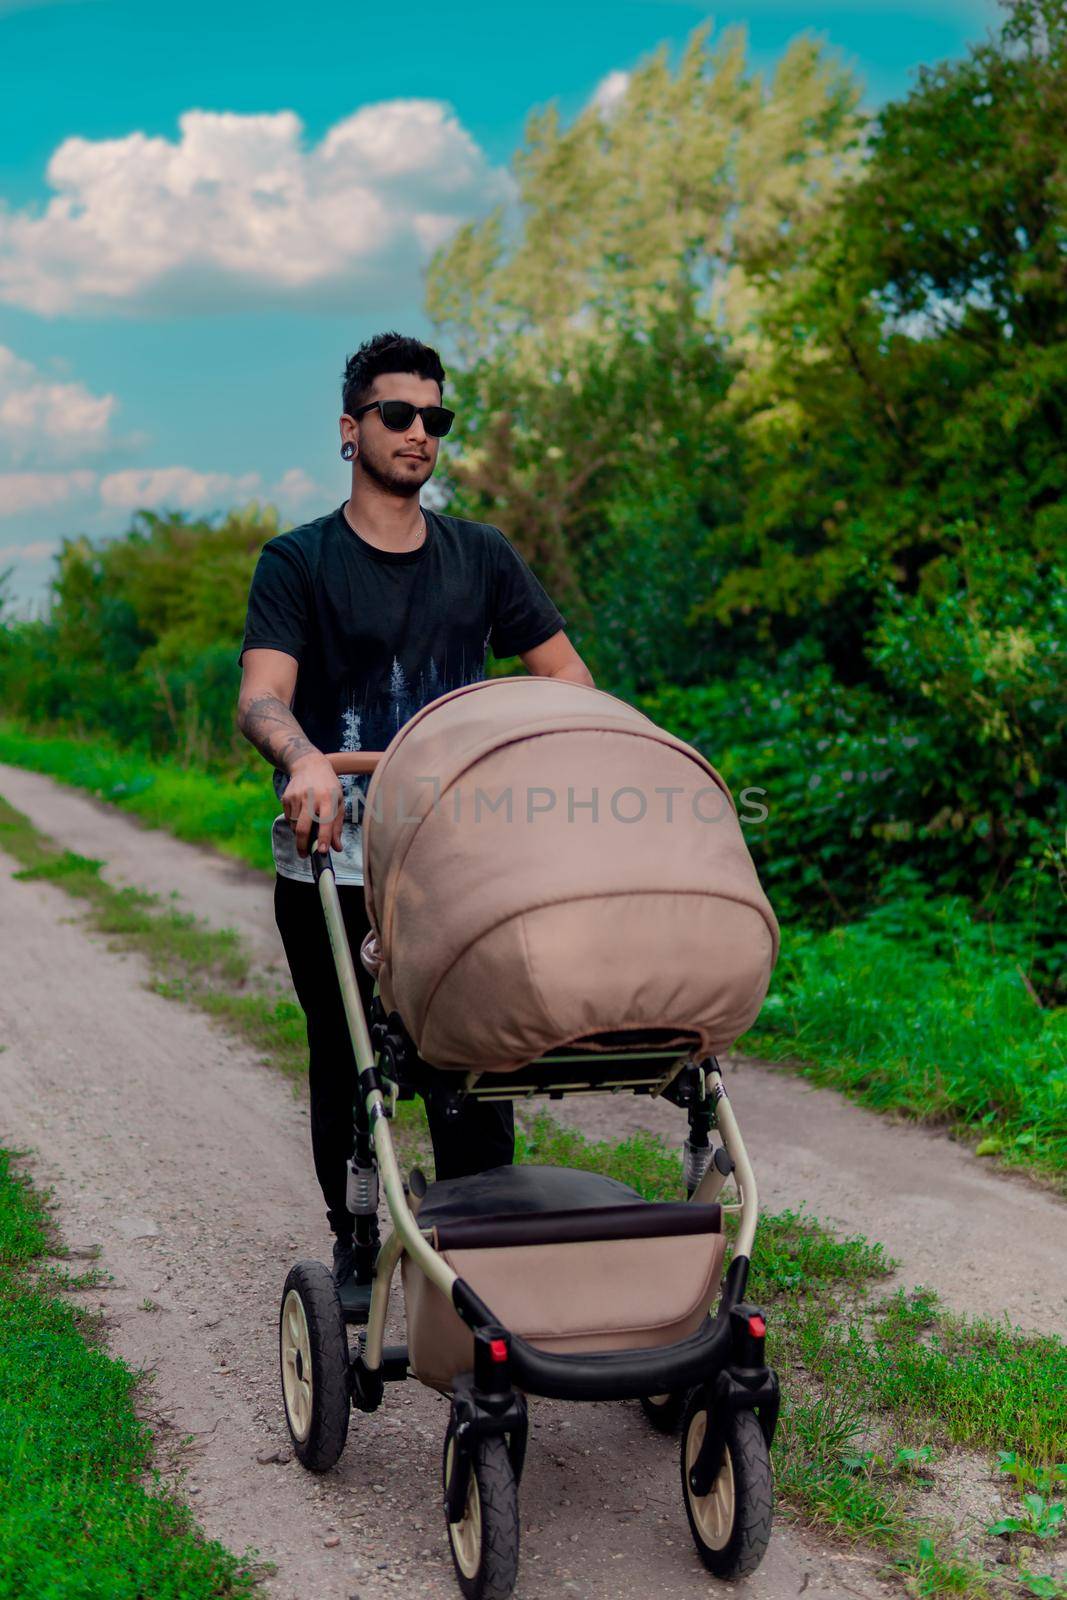 young man with stroller in the forest, summer background by banate